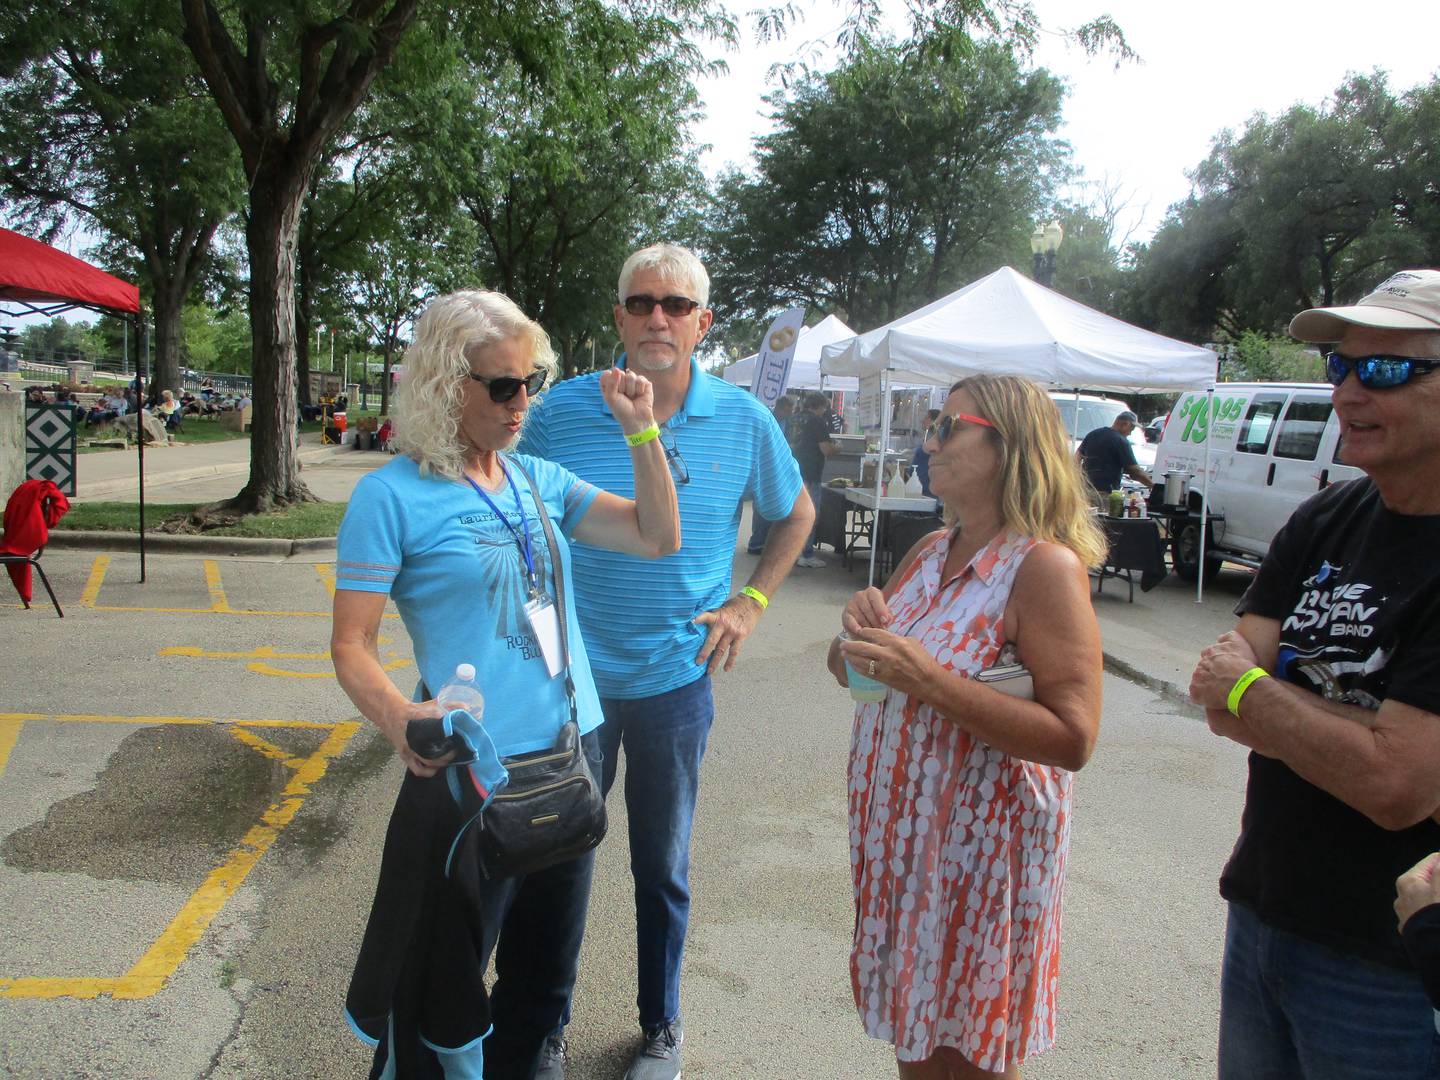 Laurie Morvan (left), a native of the Joliet area who now lives in California, greets family and friends after arriving with her Laurie Movan Band on Saturday, Aug. 13, 2022 at the Joliet Blues Festival in Billie Limacher Bicentennial Park.